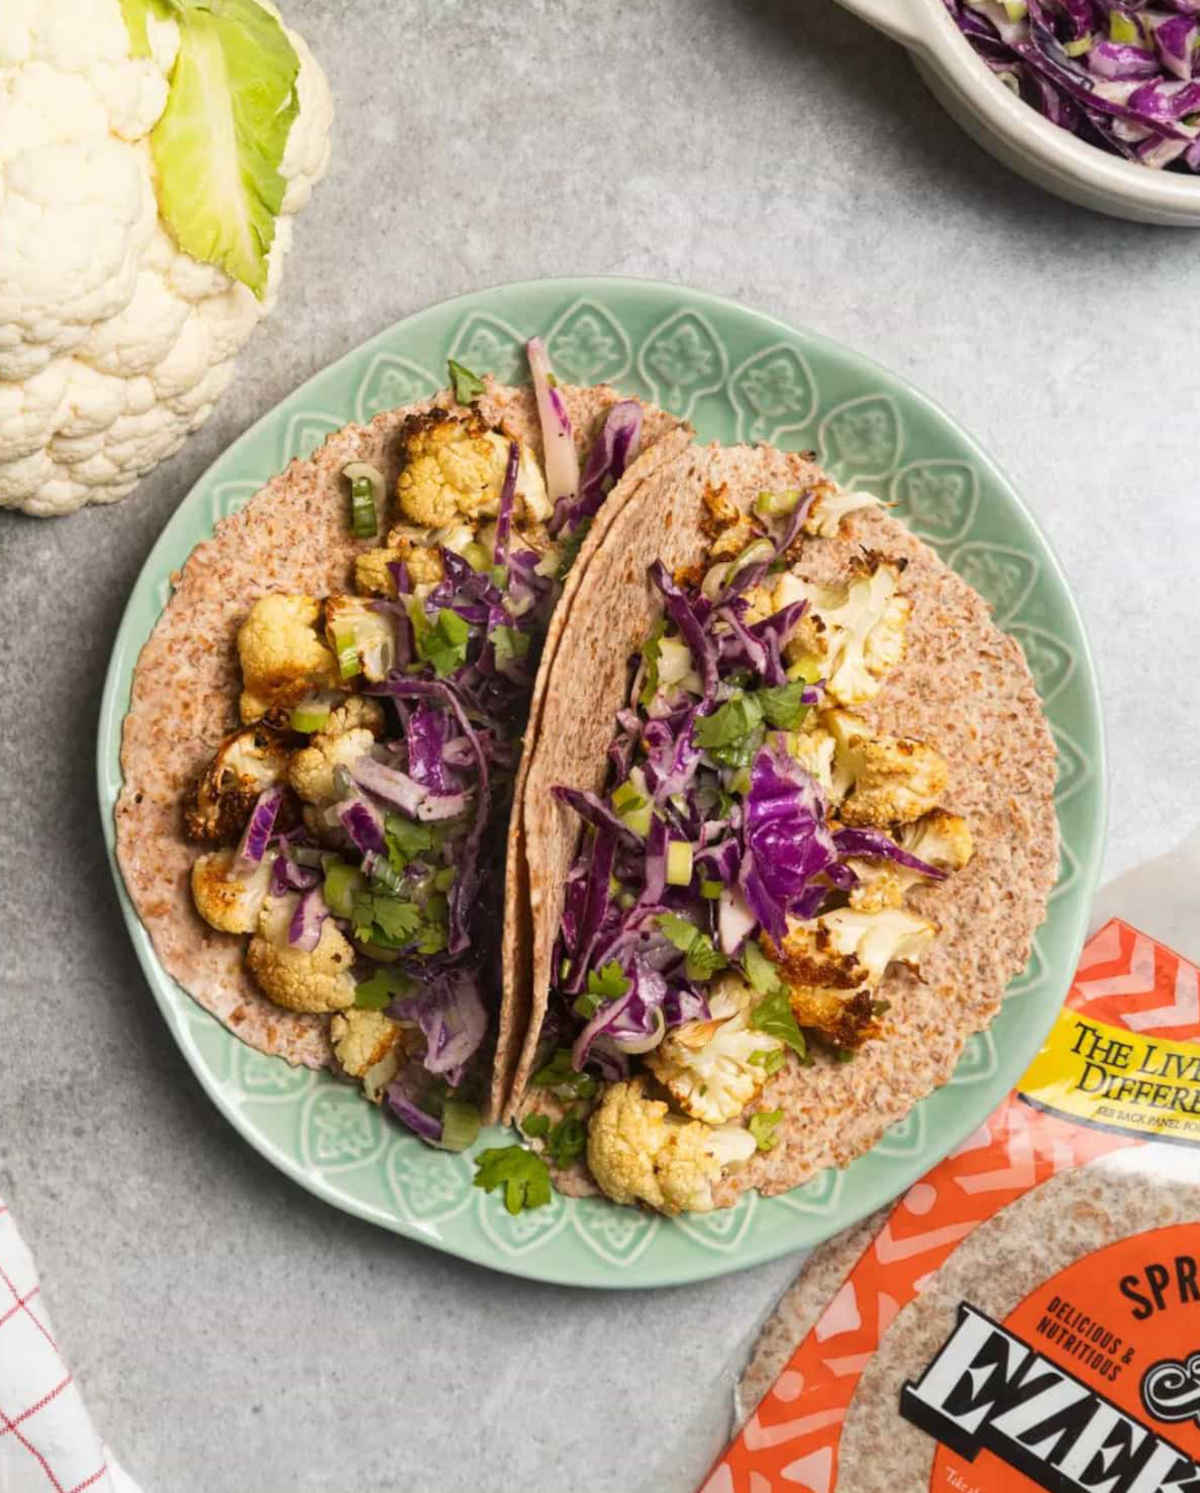 A package of Food for Life sprouted tortillas next to plate of cauliflower tacos.